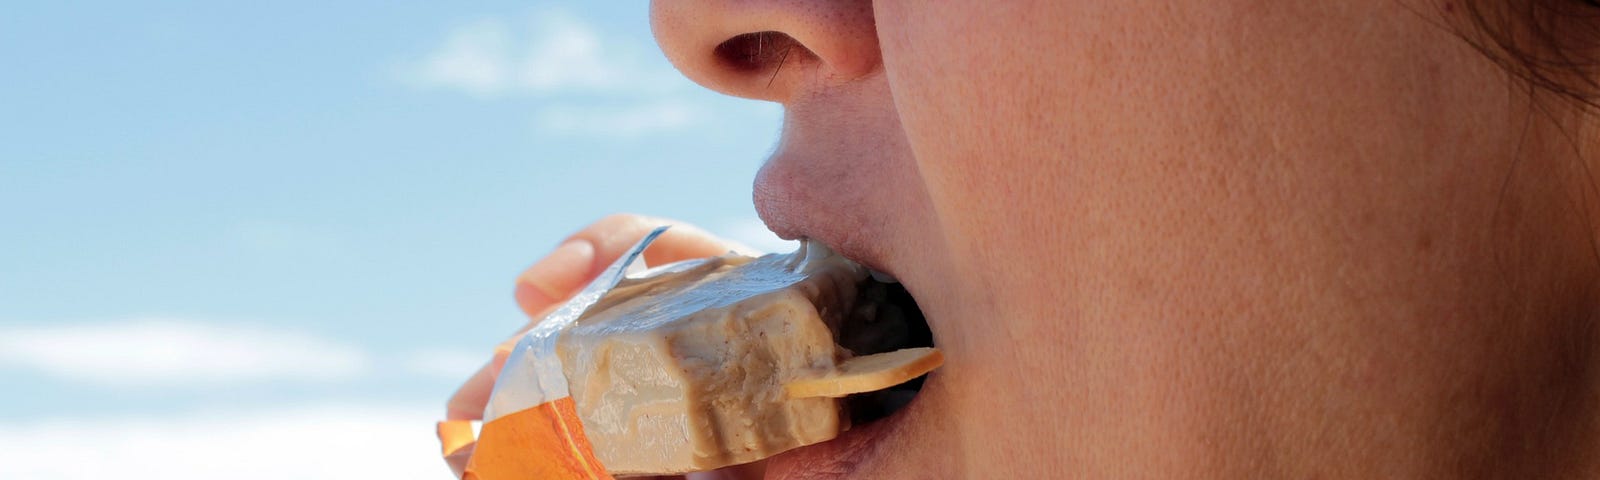 Woman at the beach eating ice-cream.